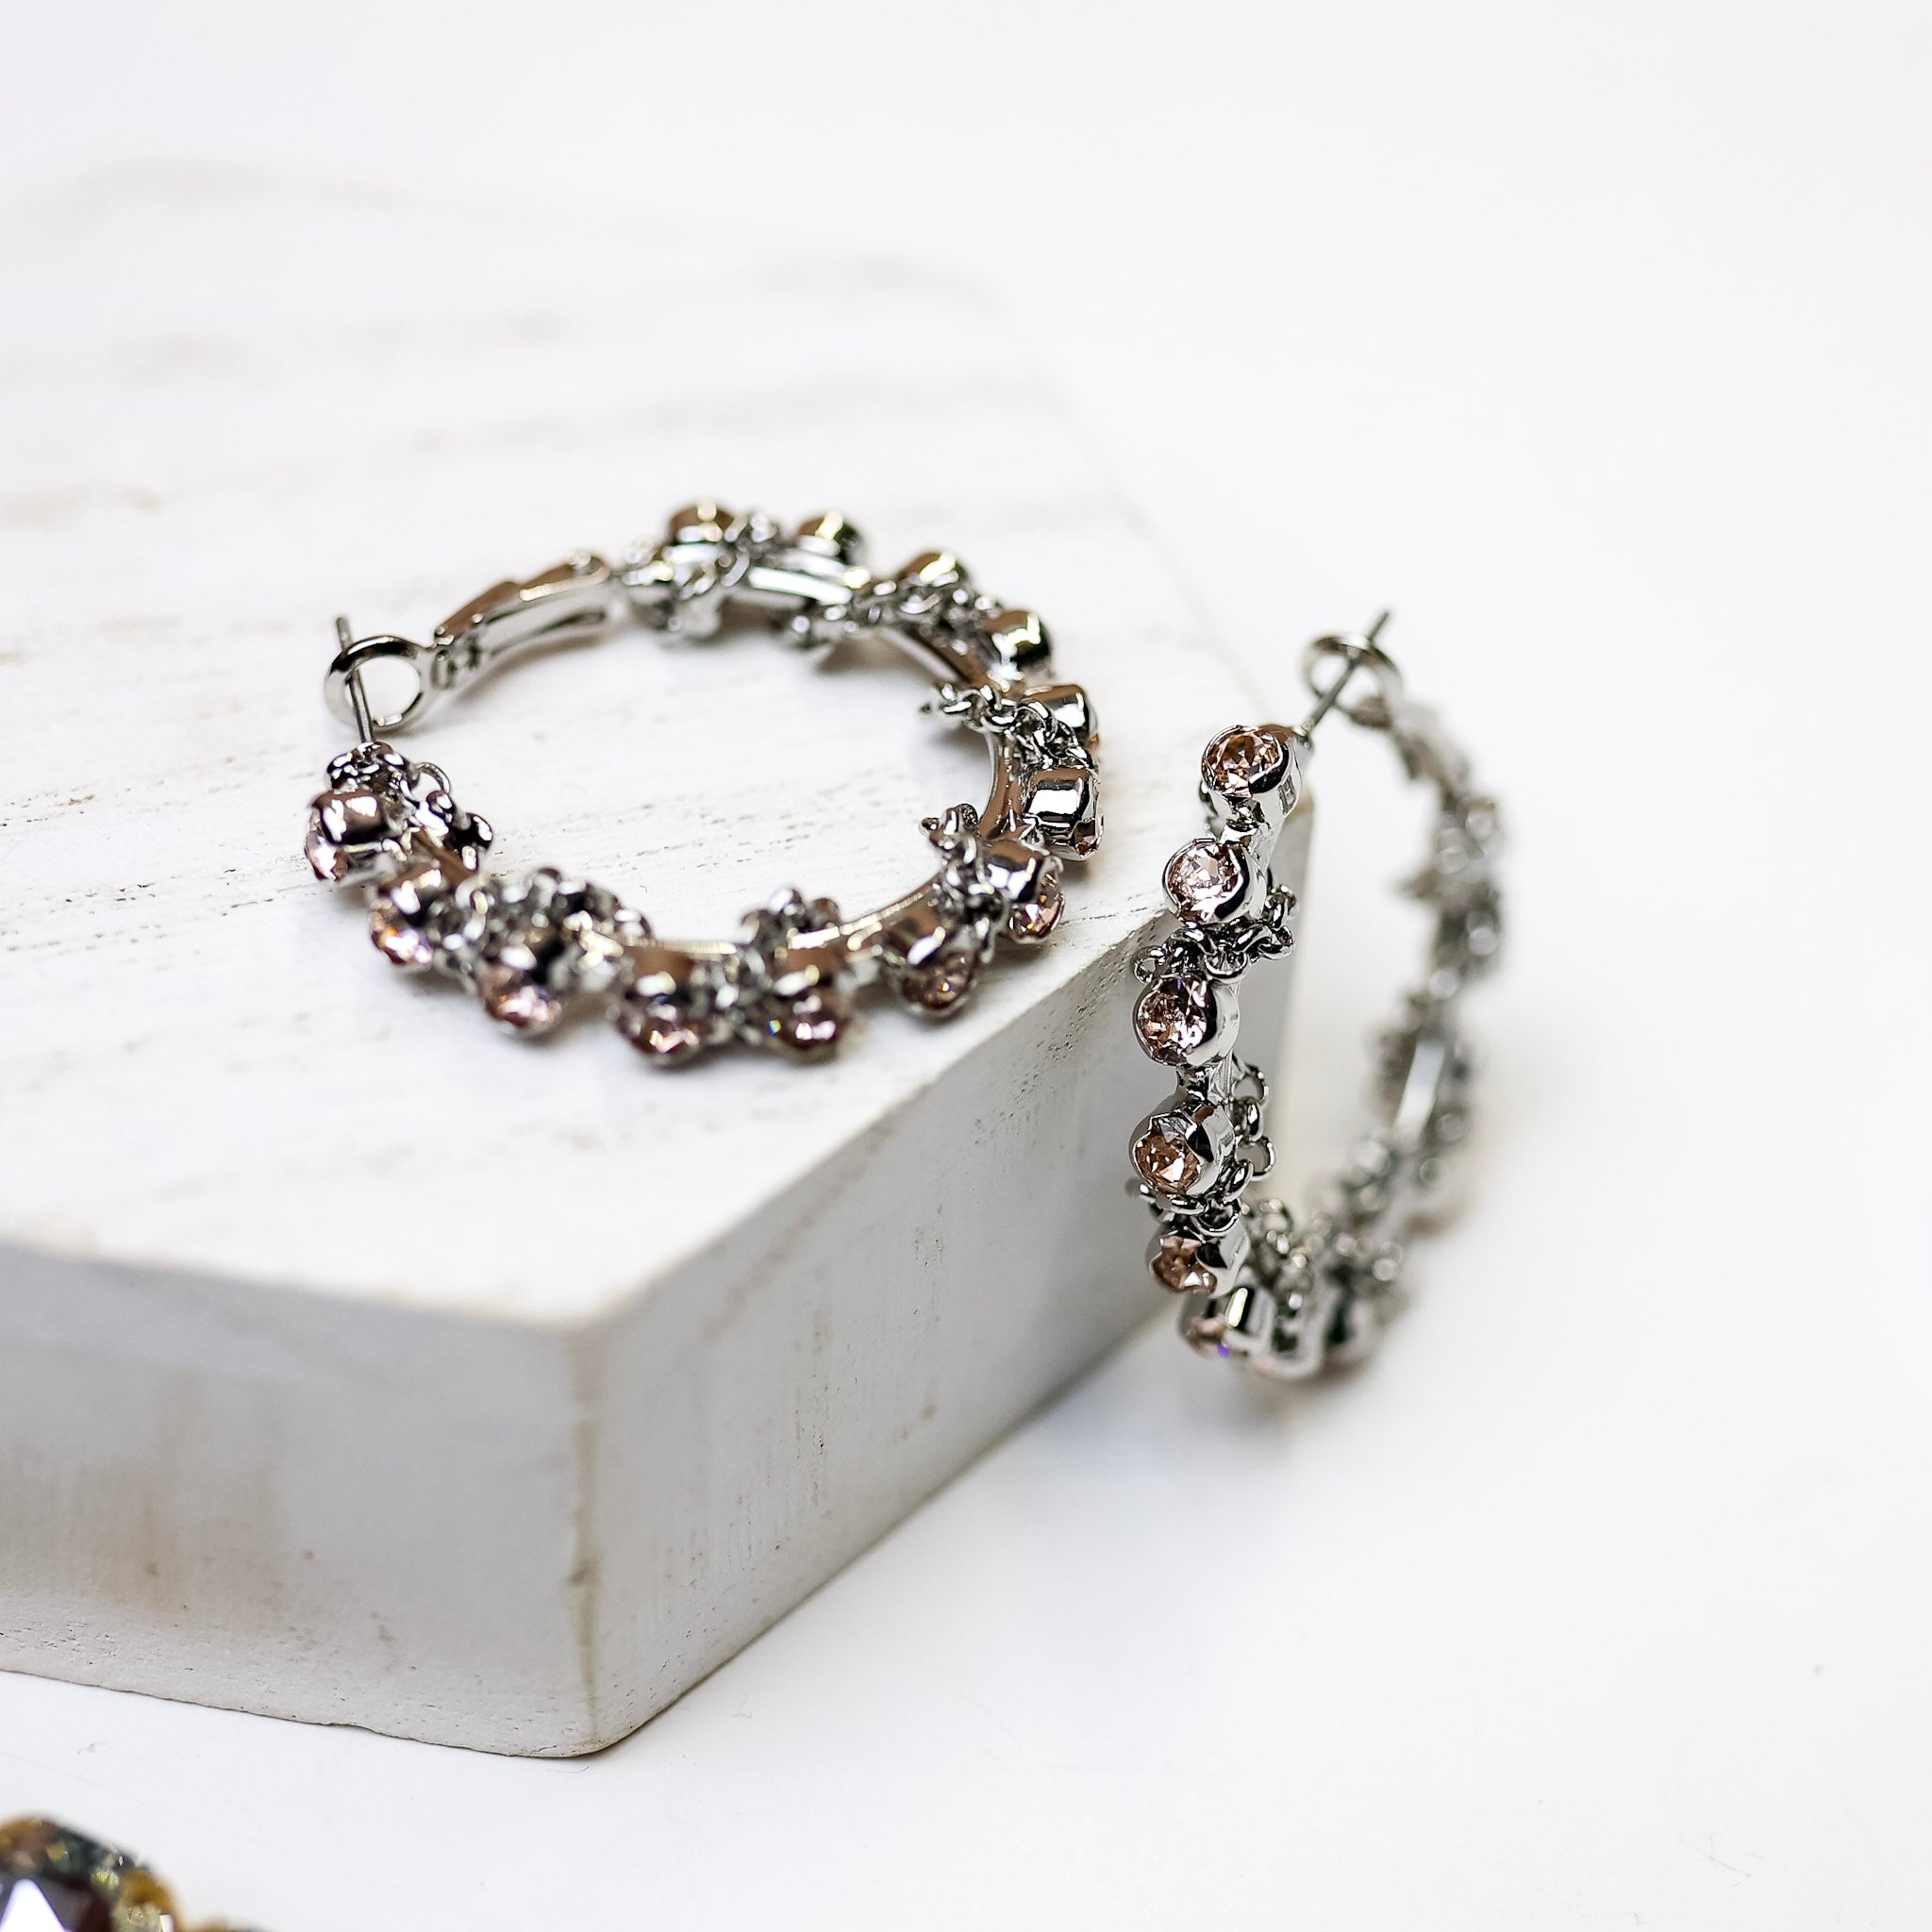 A pair of silver-tone hoop earrings with blush pink crystals and a chain detail. Pictured on a white background.